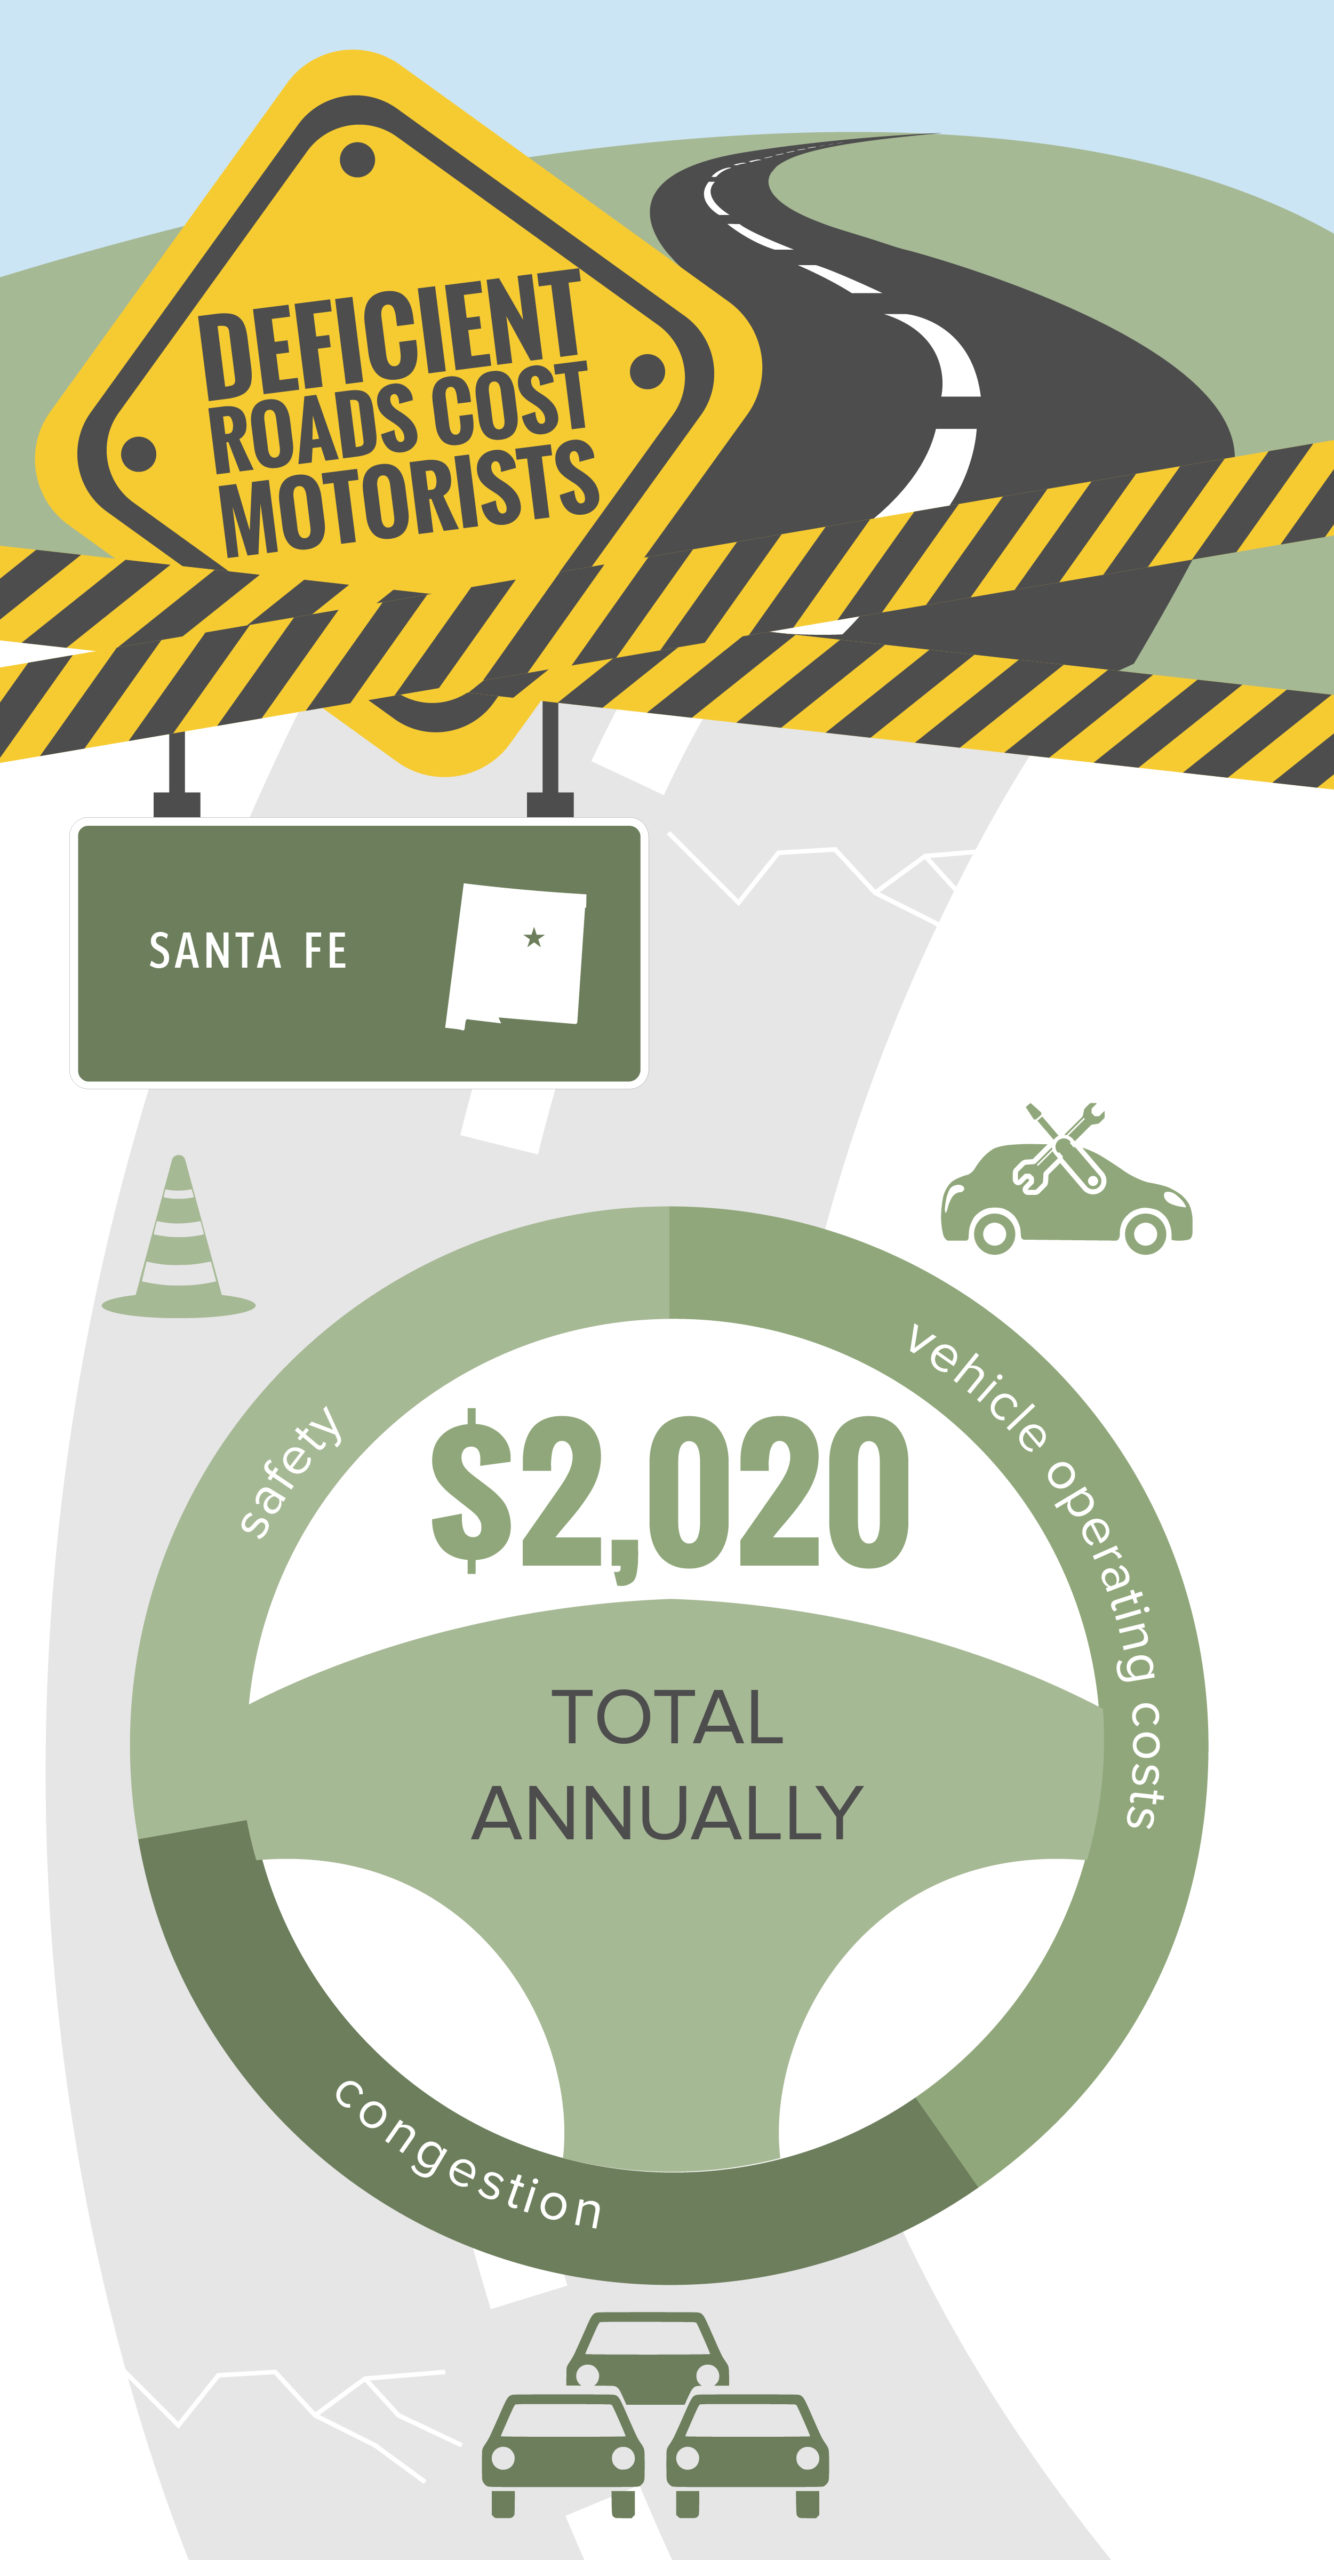 Santa Fe Deficient Roads Cost to Motorists Infographic – January 2022